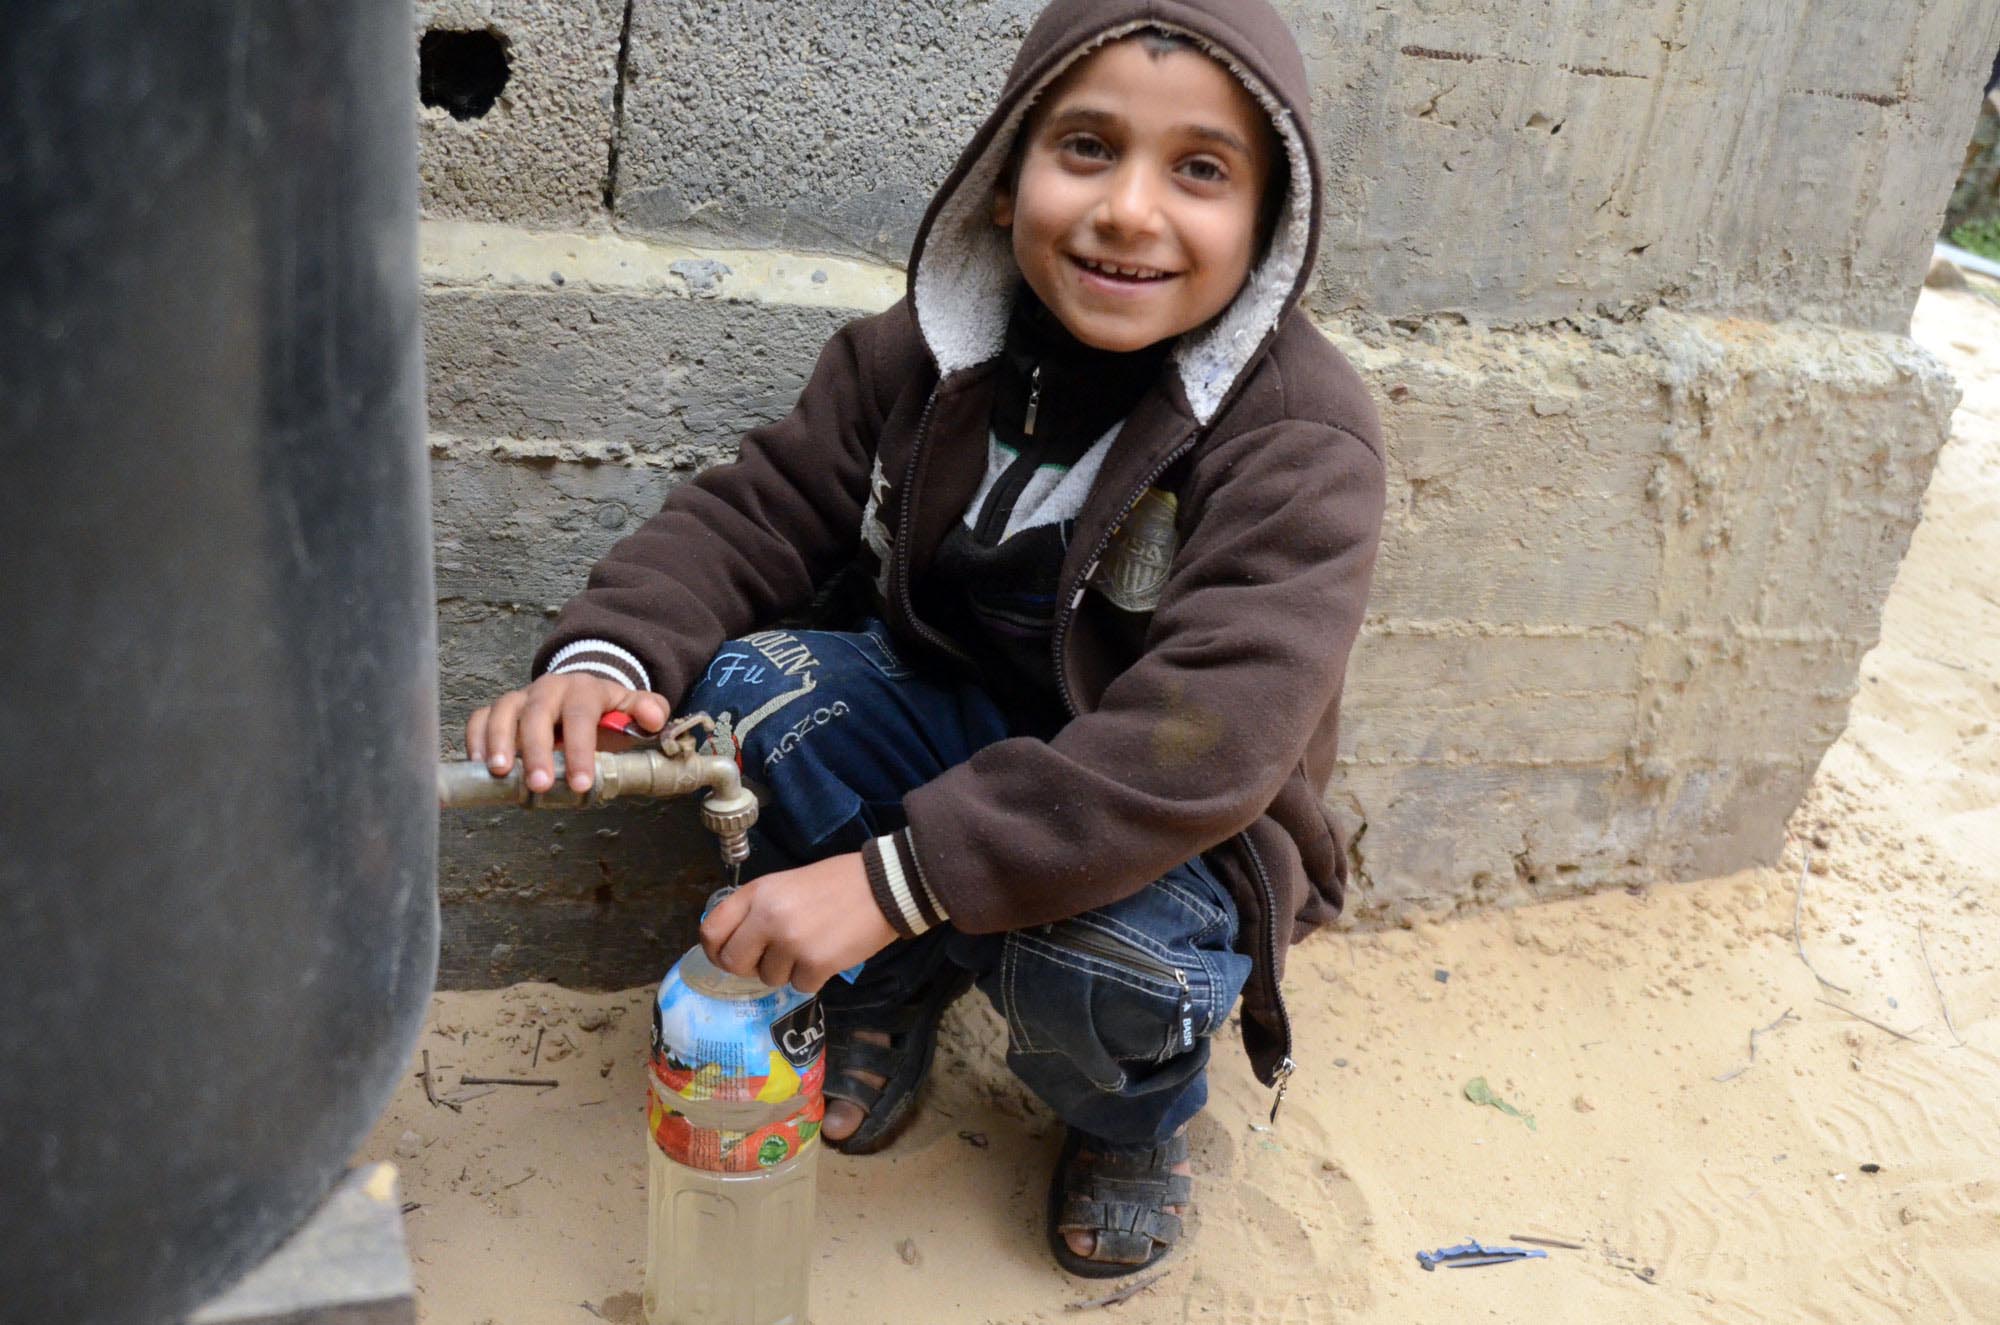 Now that Mohanad’s home is connected to a water network, he can fill his water bottle any time from the tank.